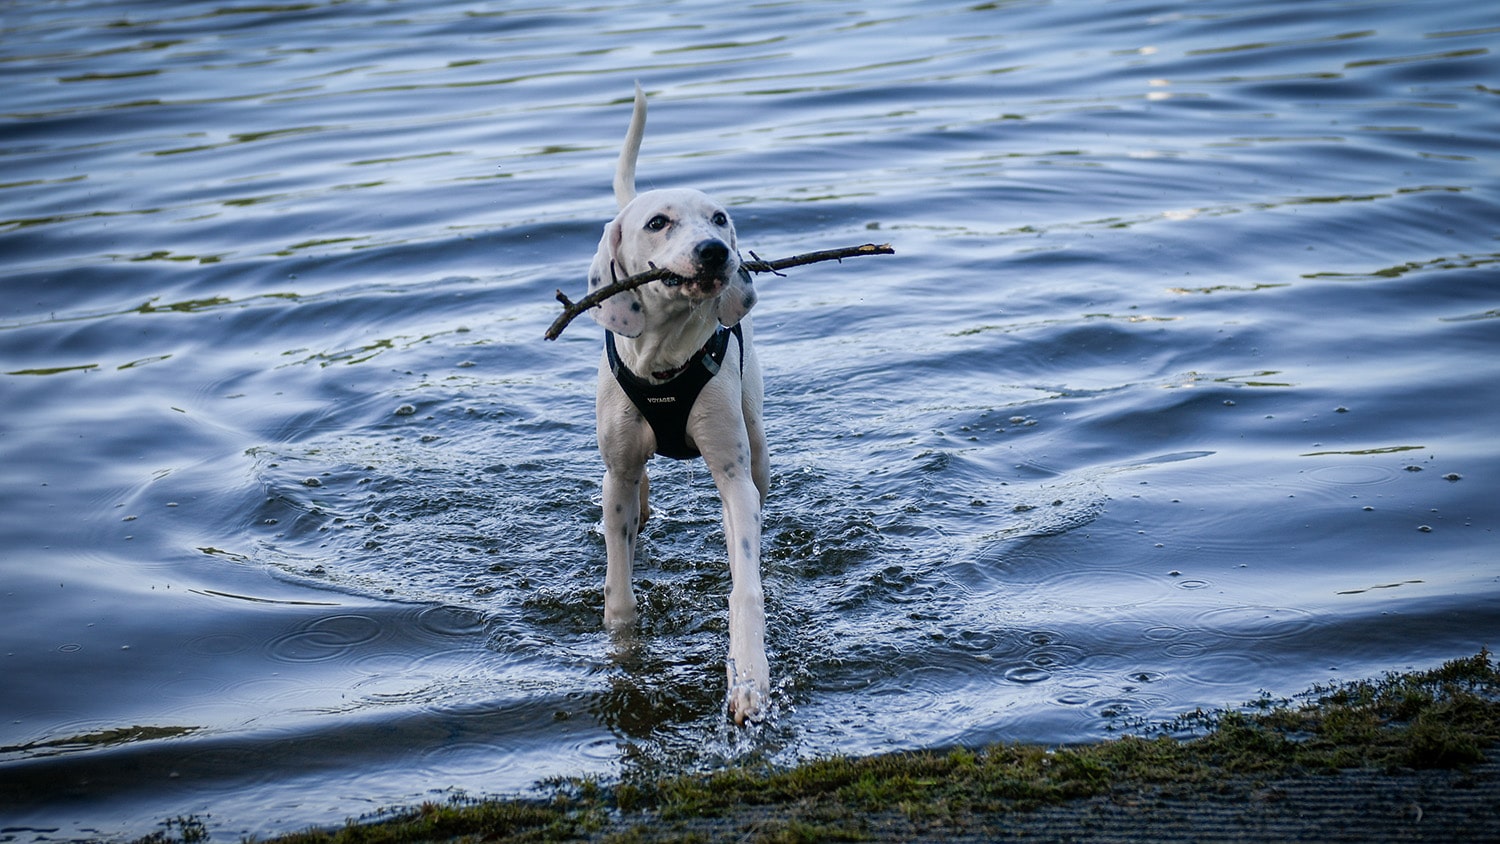 A dog coming out of the water.